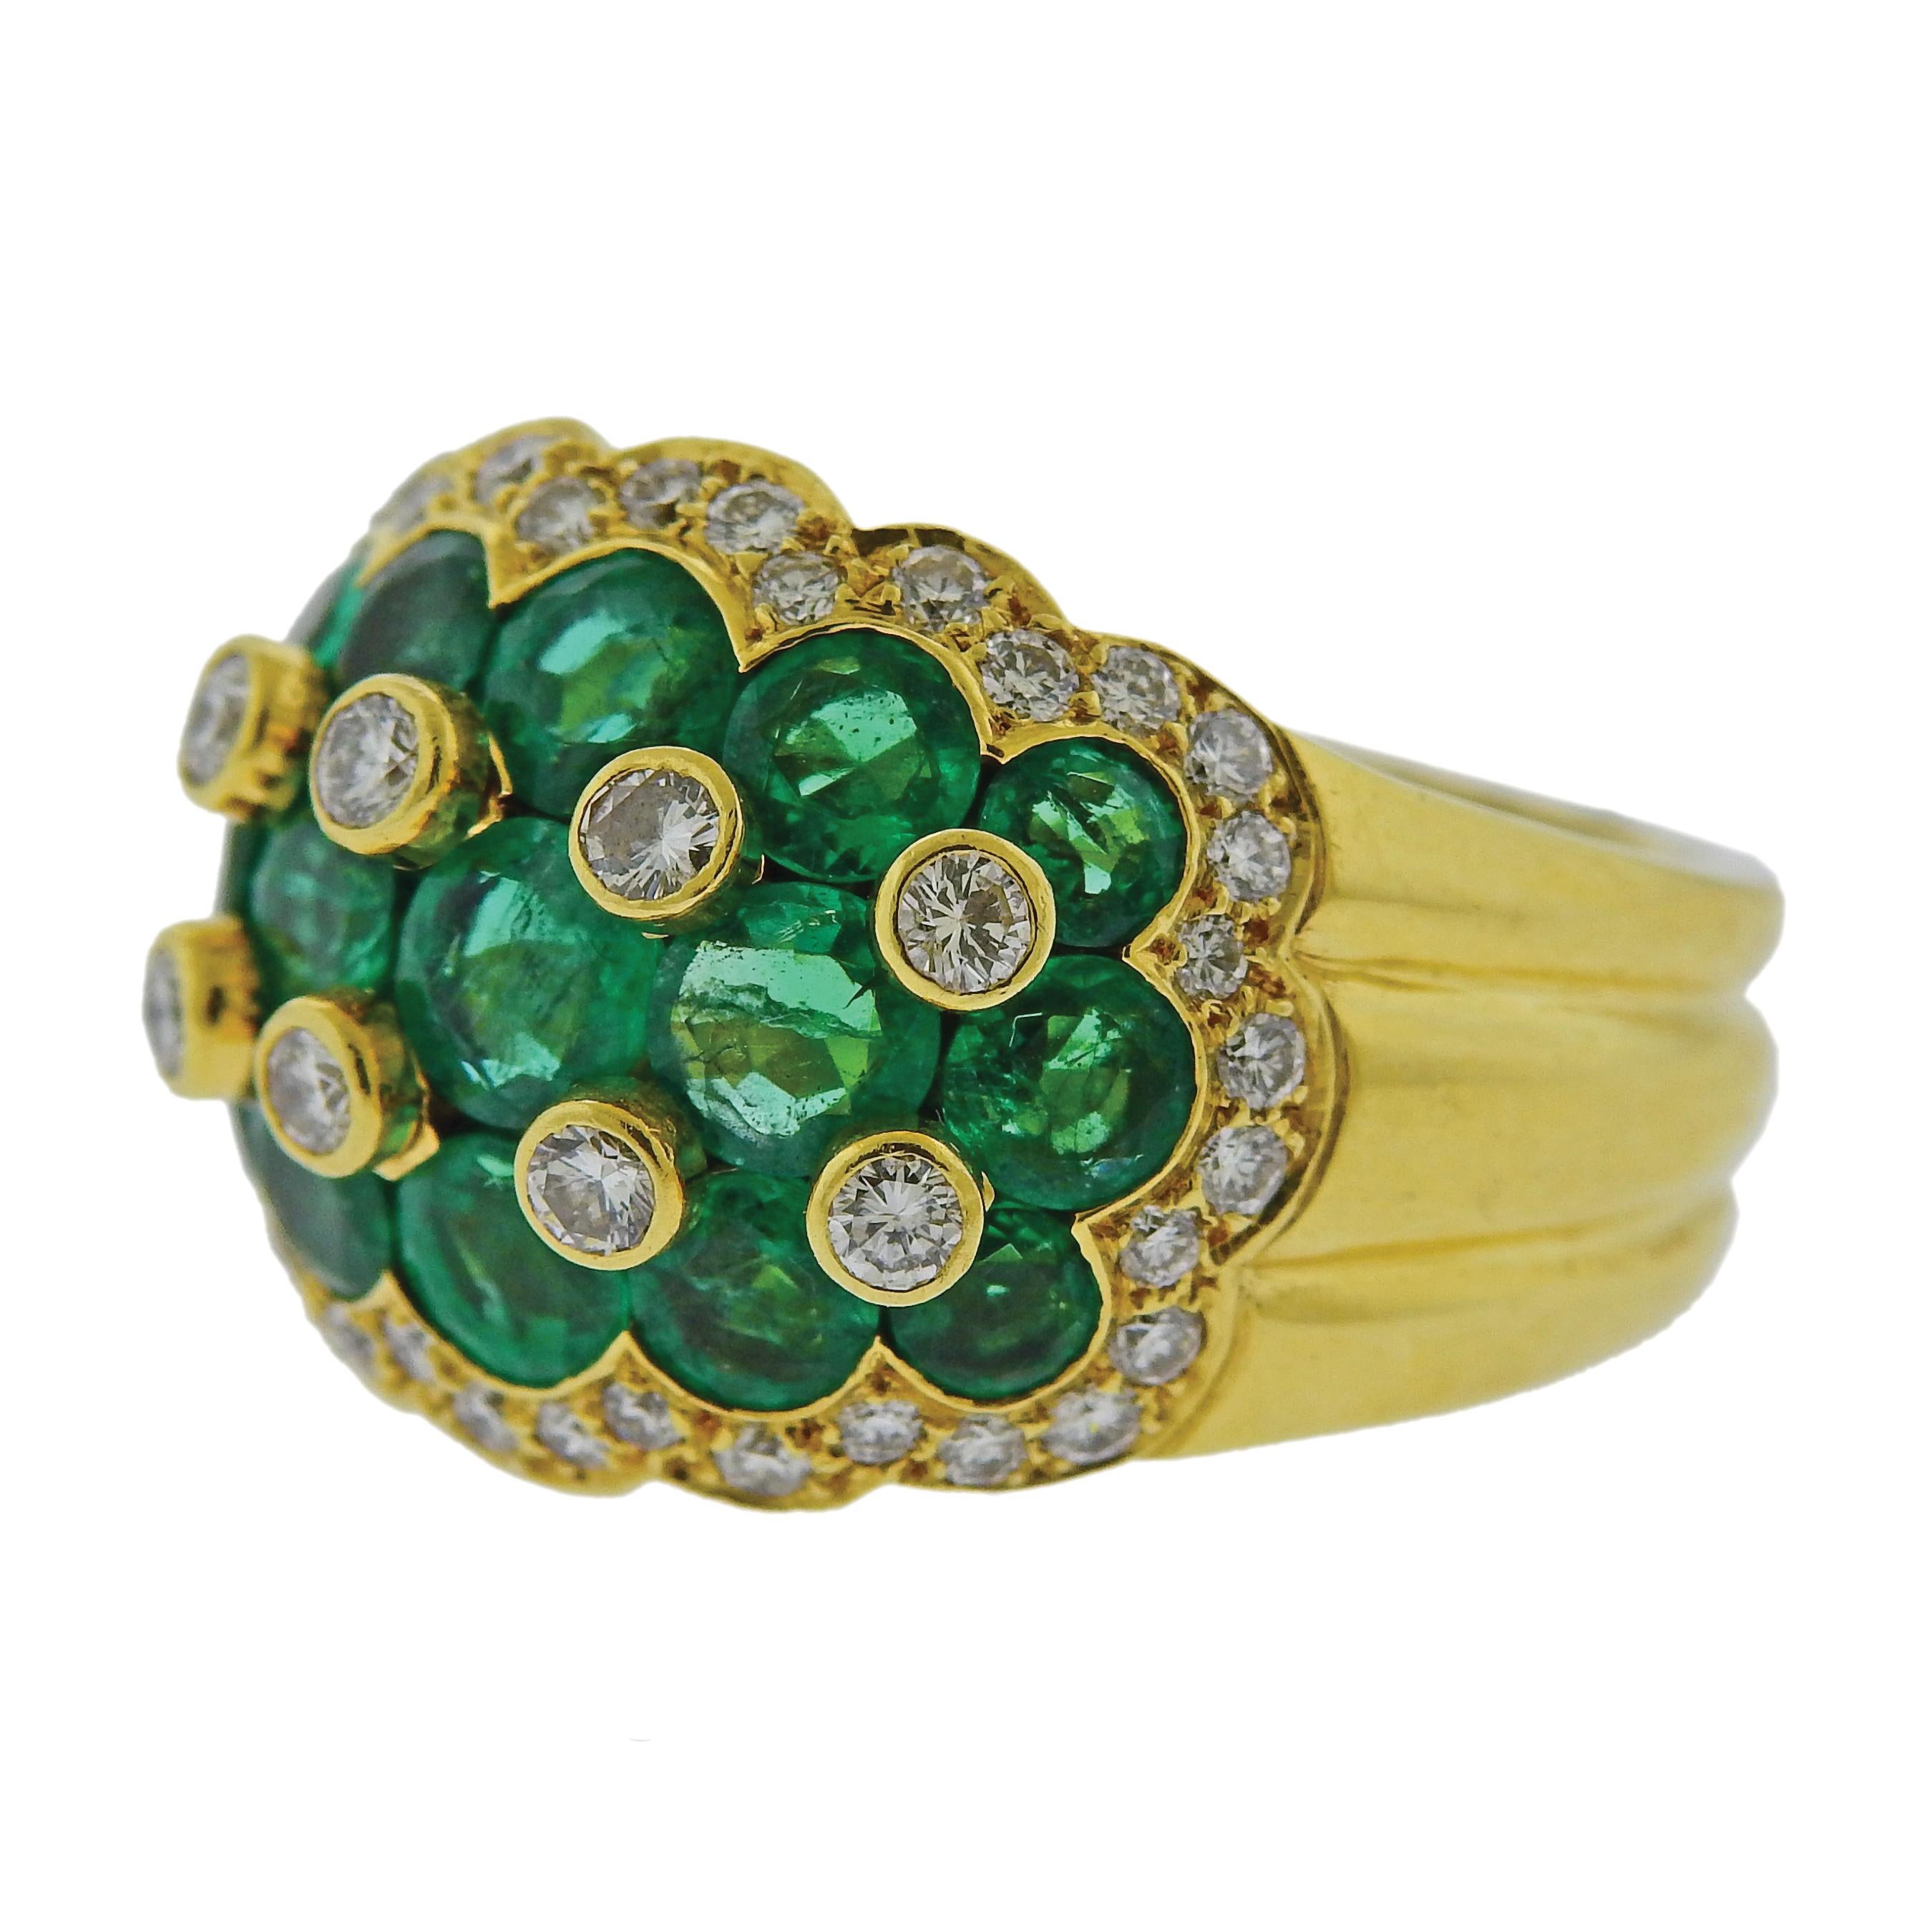 18k yellow gold Van Cleef & Arpels ring, set with emeralds and approx. 0.54ctw in diamonds. The ring is size 6.75, ring top is 17mm wide. Marked Van Cleef & Arpels, 56393, 18k NY. Weighs 14 grams.

SKU#R-01970